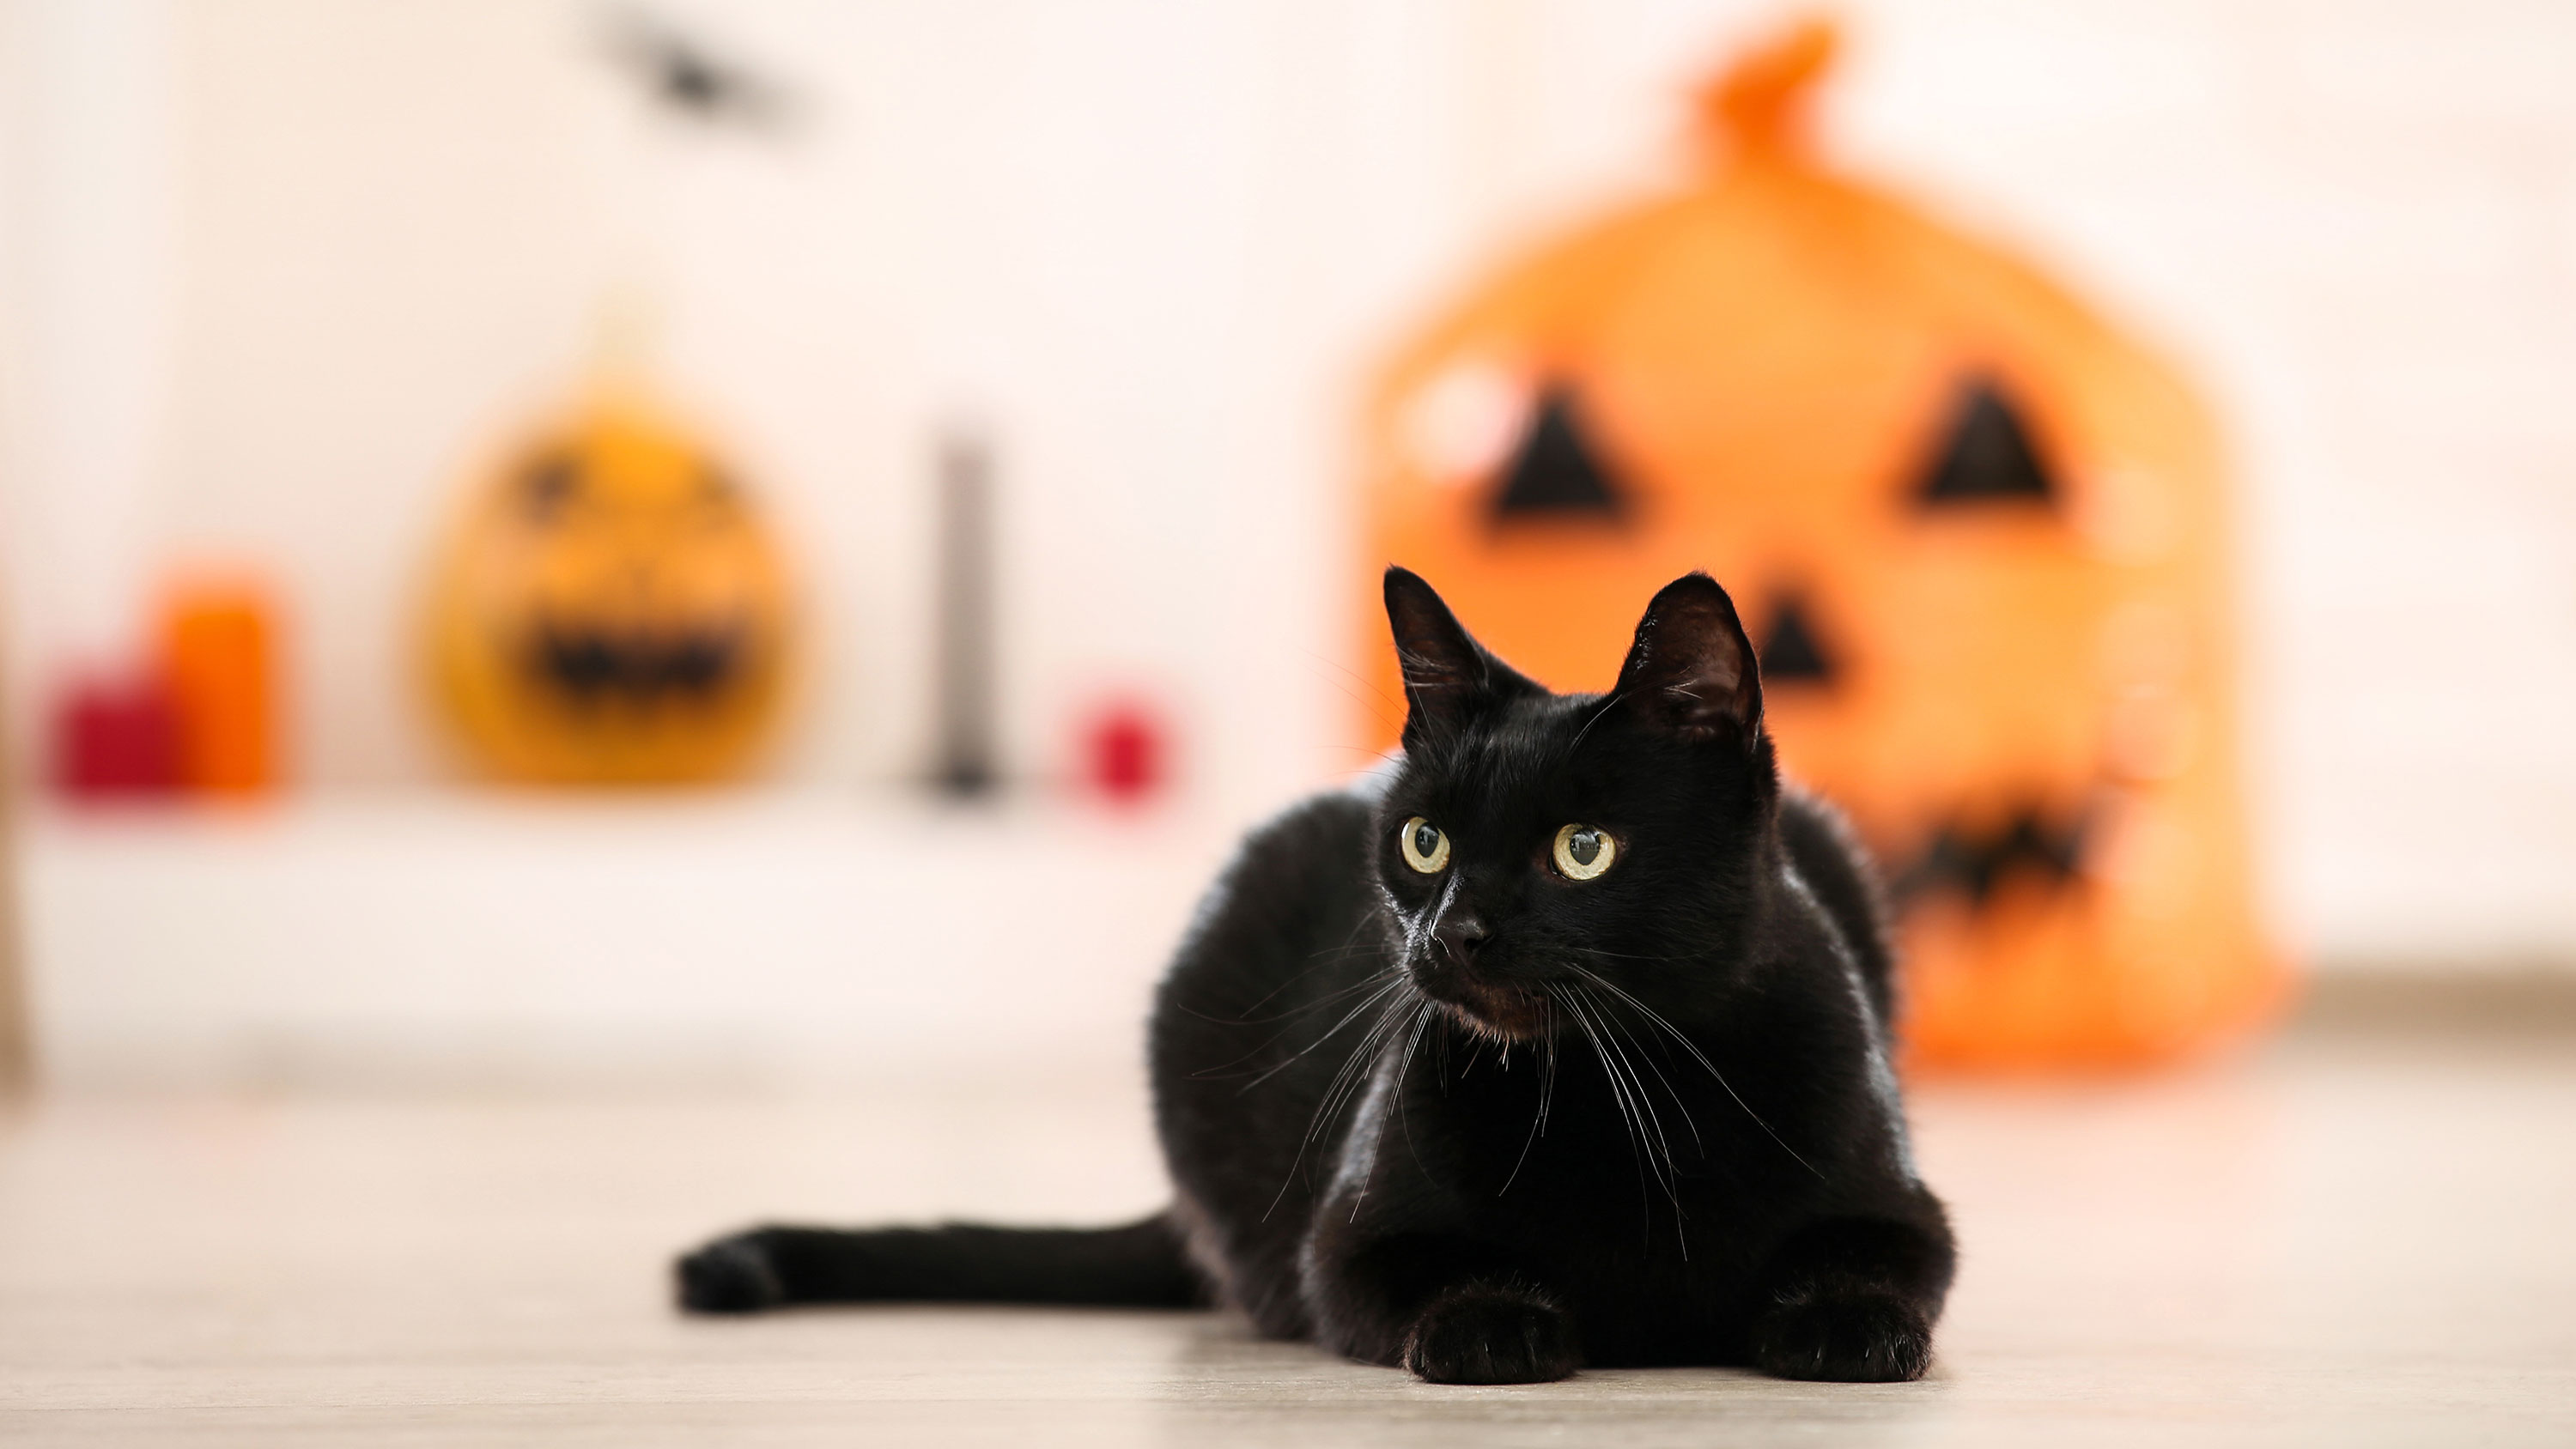 National Black Cat Day Here Are Five Facts To Know About Our Black Feline Friends Cnn